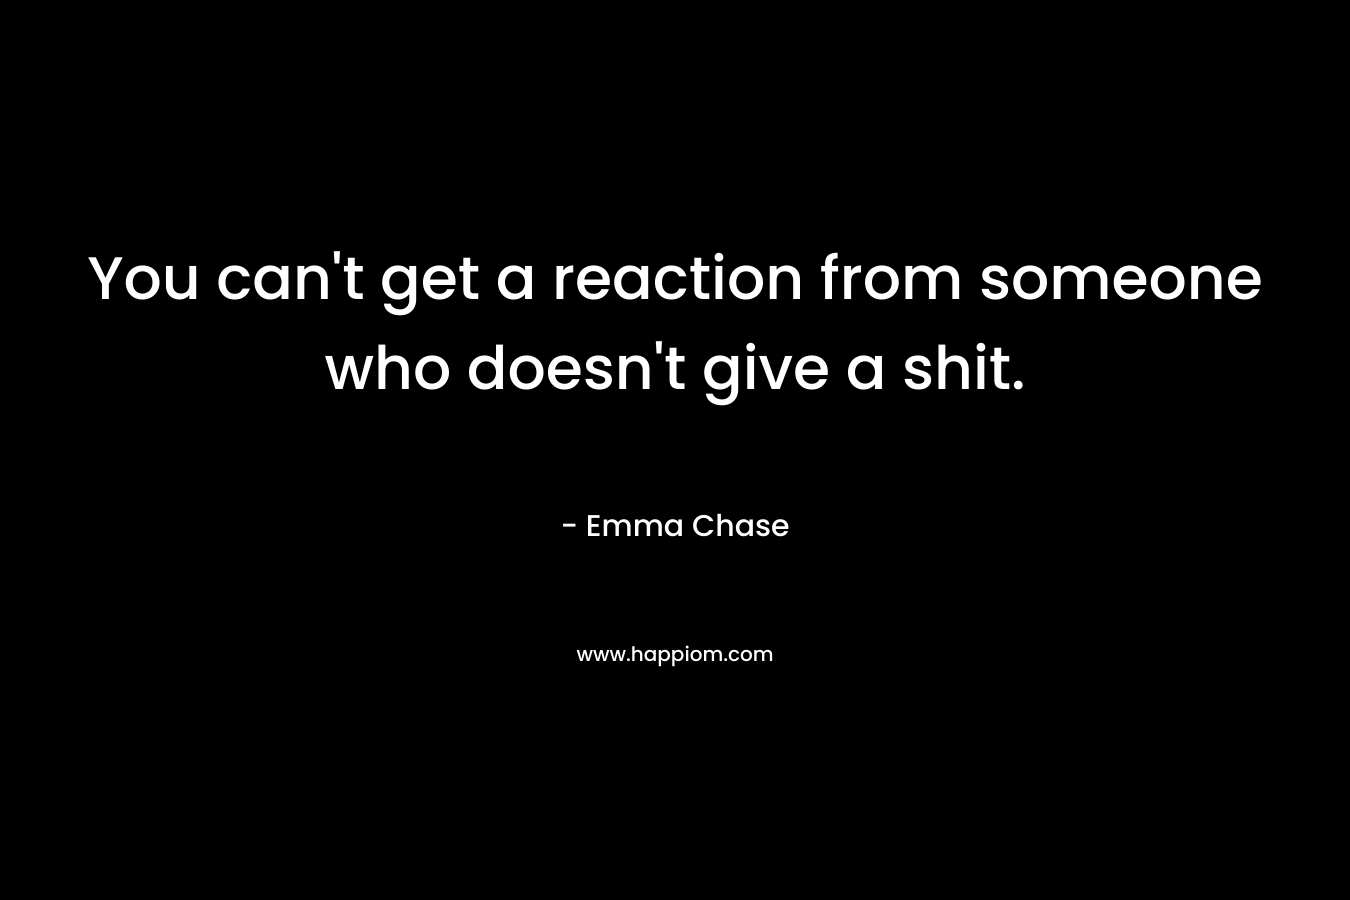 You can’t get a reaction from someone who doesn’t give a shit. – Emma Chase